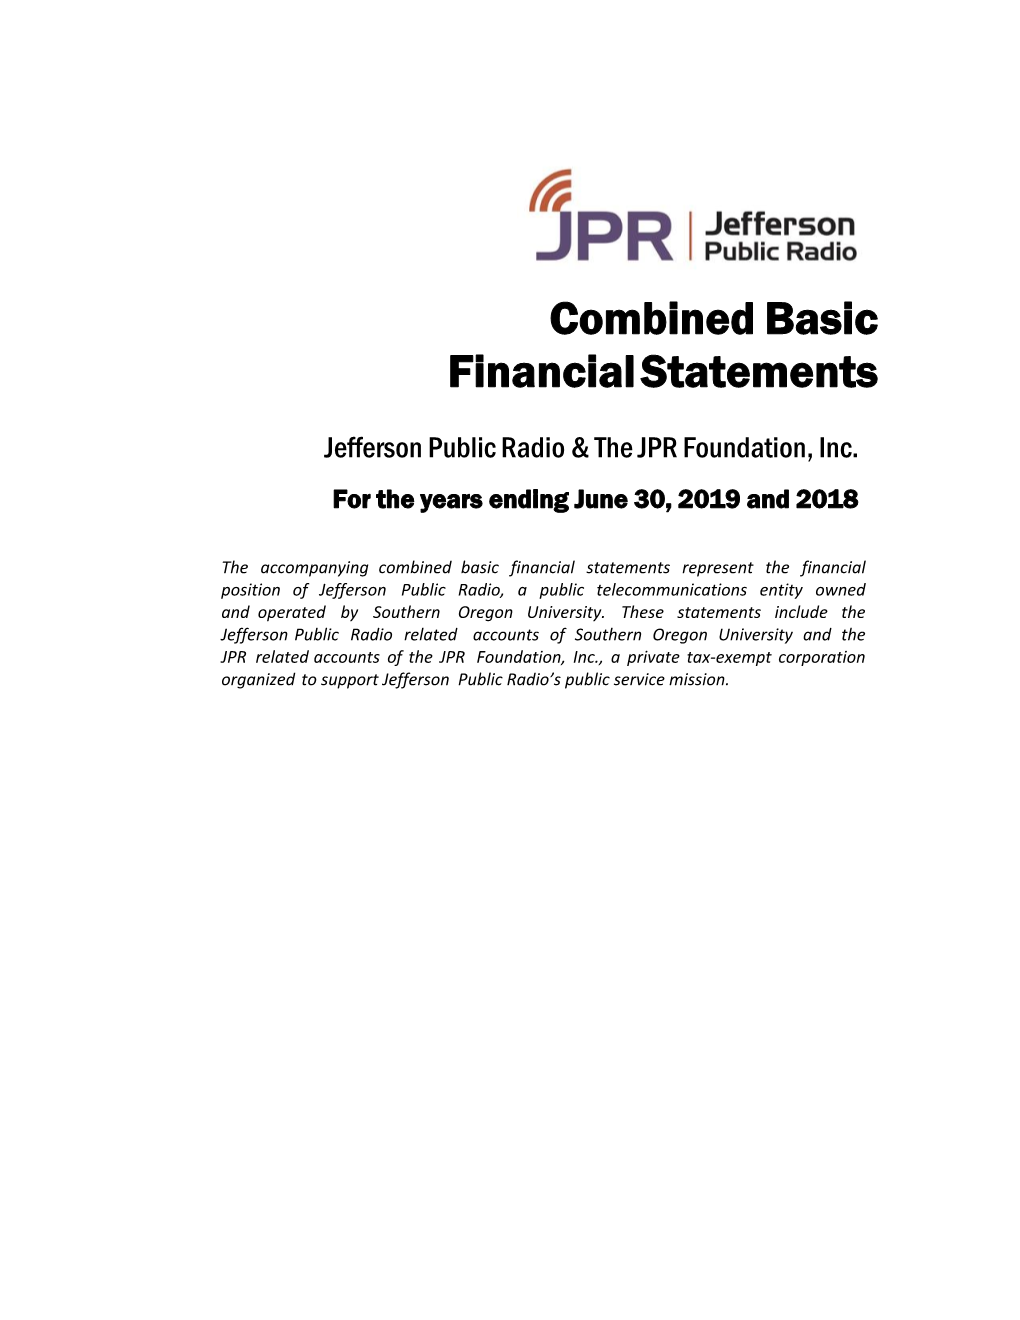 Combined Basic Financial Statements